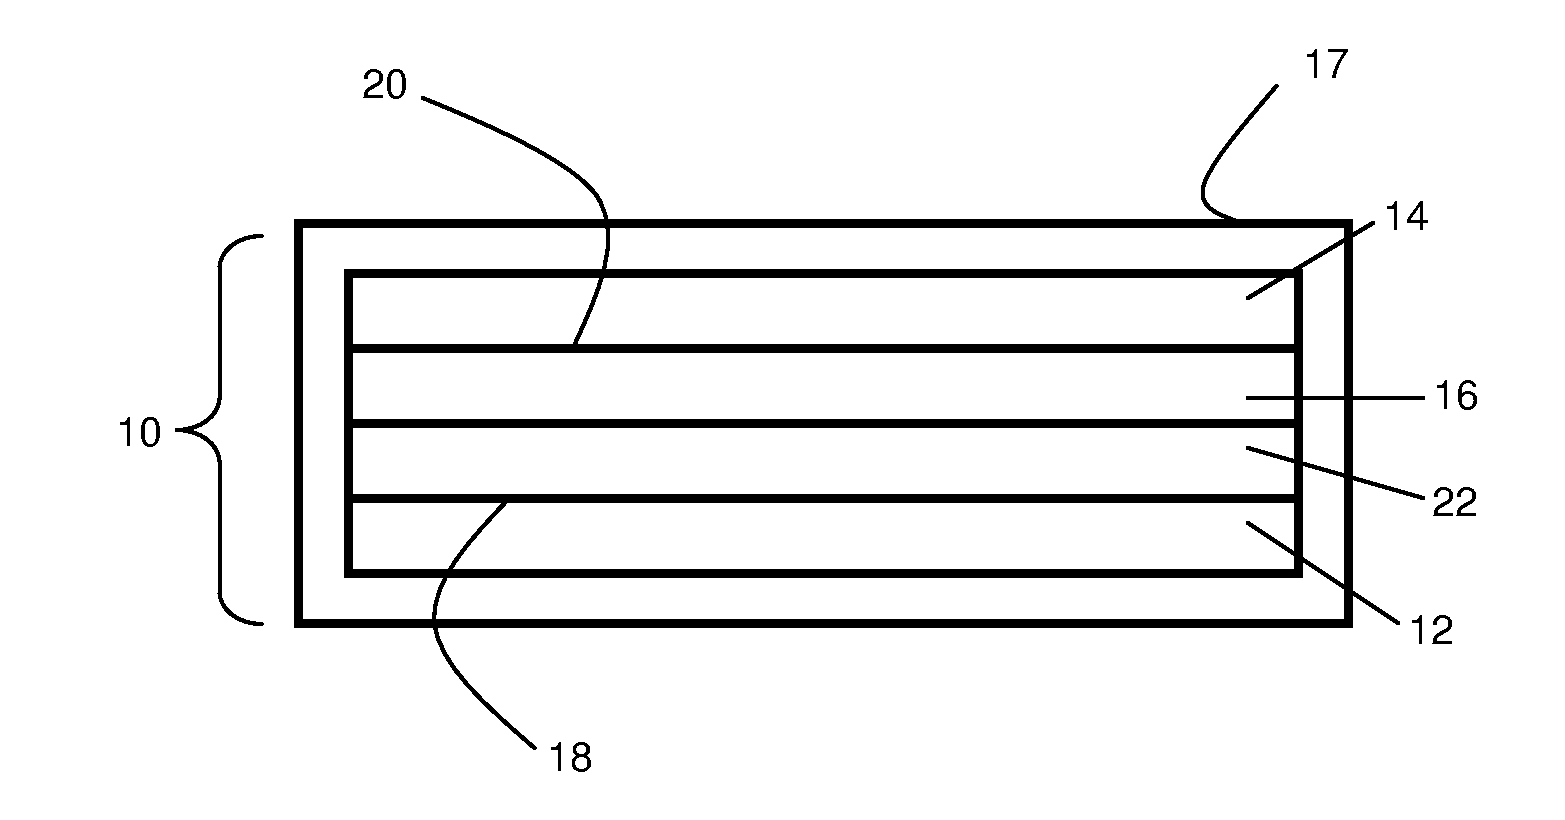 Electrolyte materials for use in electrochemical cells